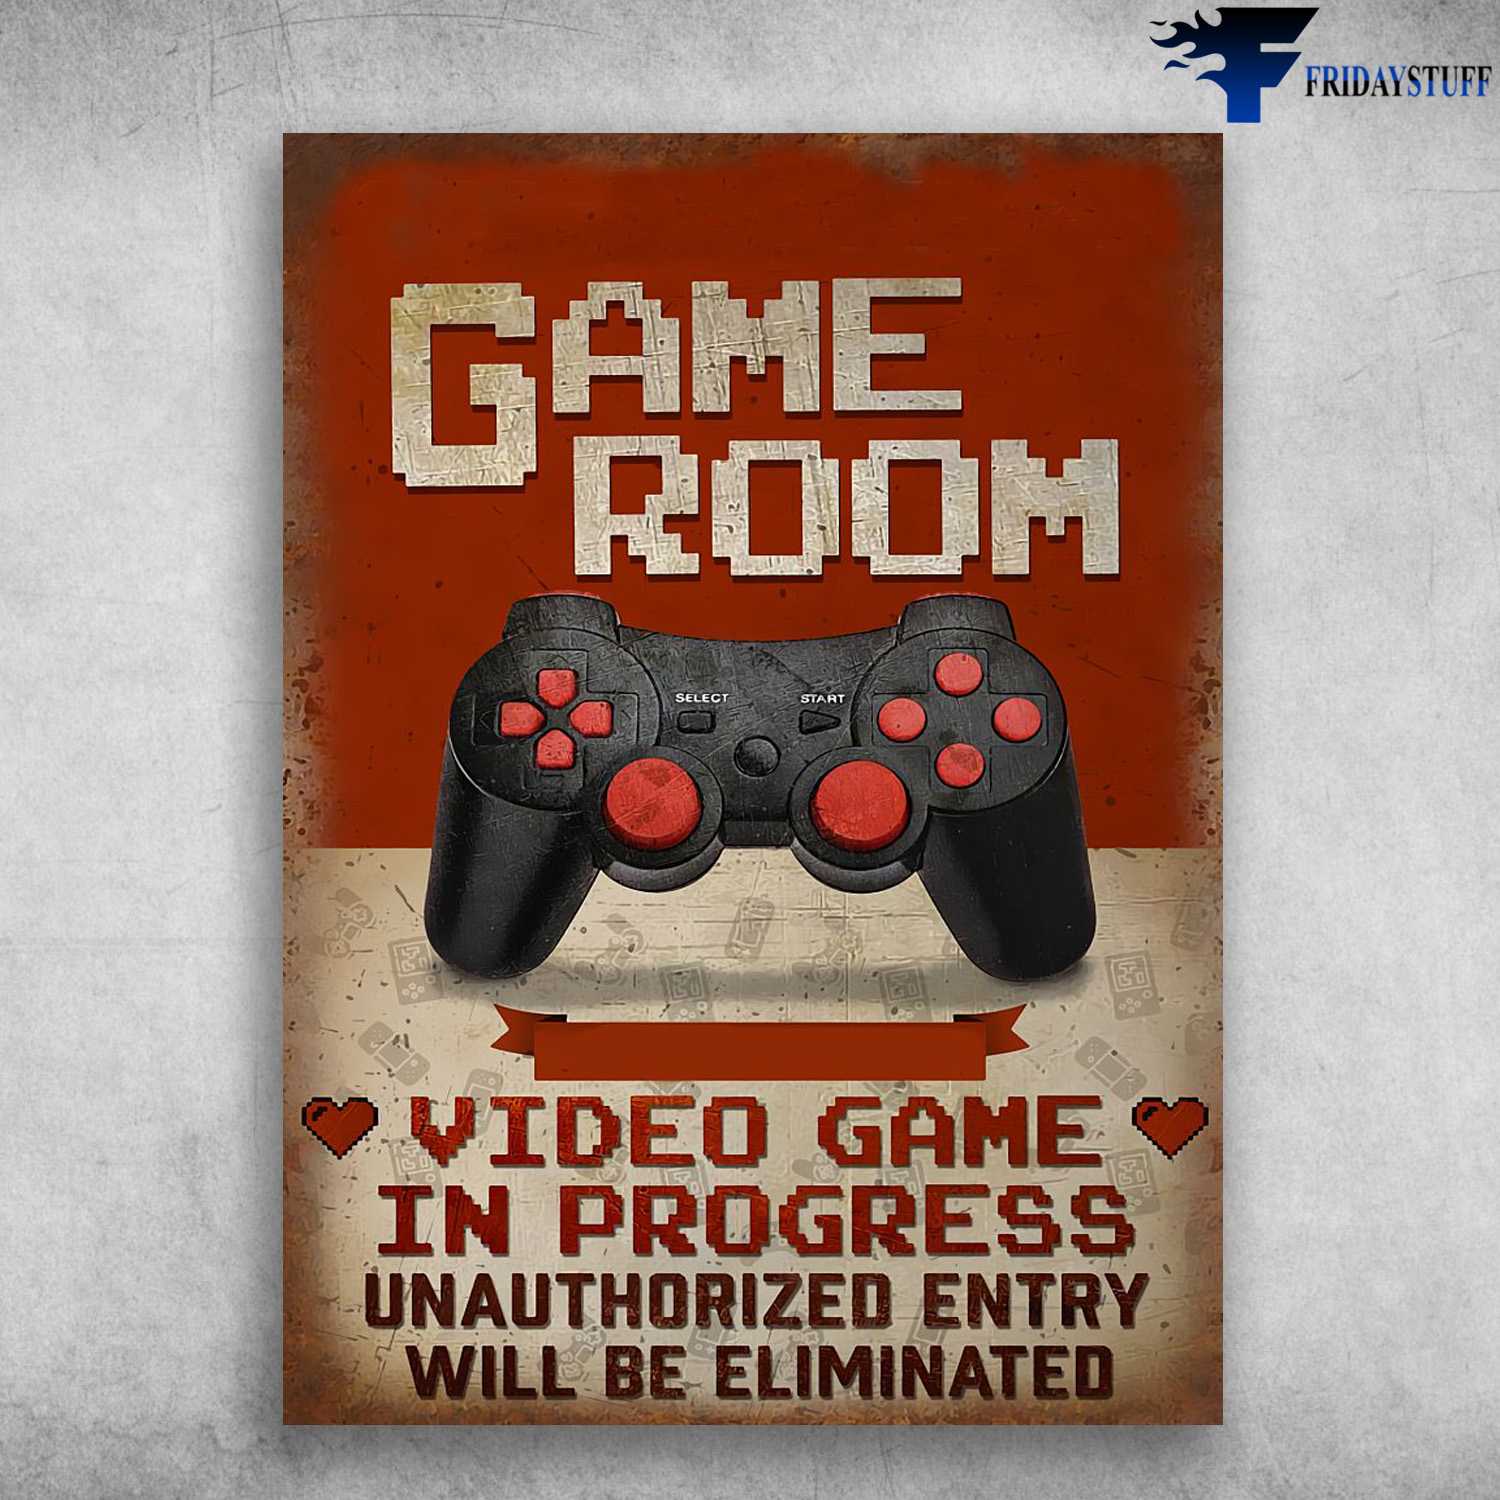 Game Room, Video Game In Progress, Unauthorized Entry, Will Be Eliminated, Game Room Poster